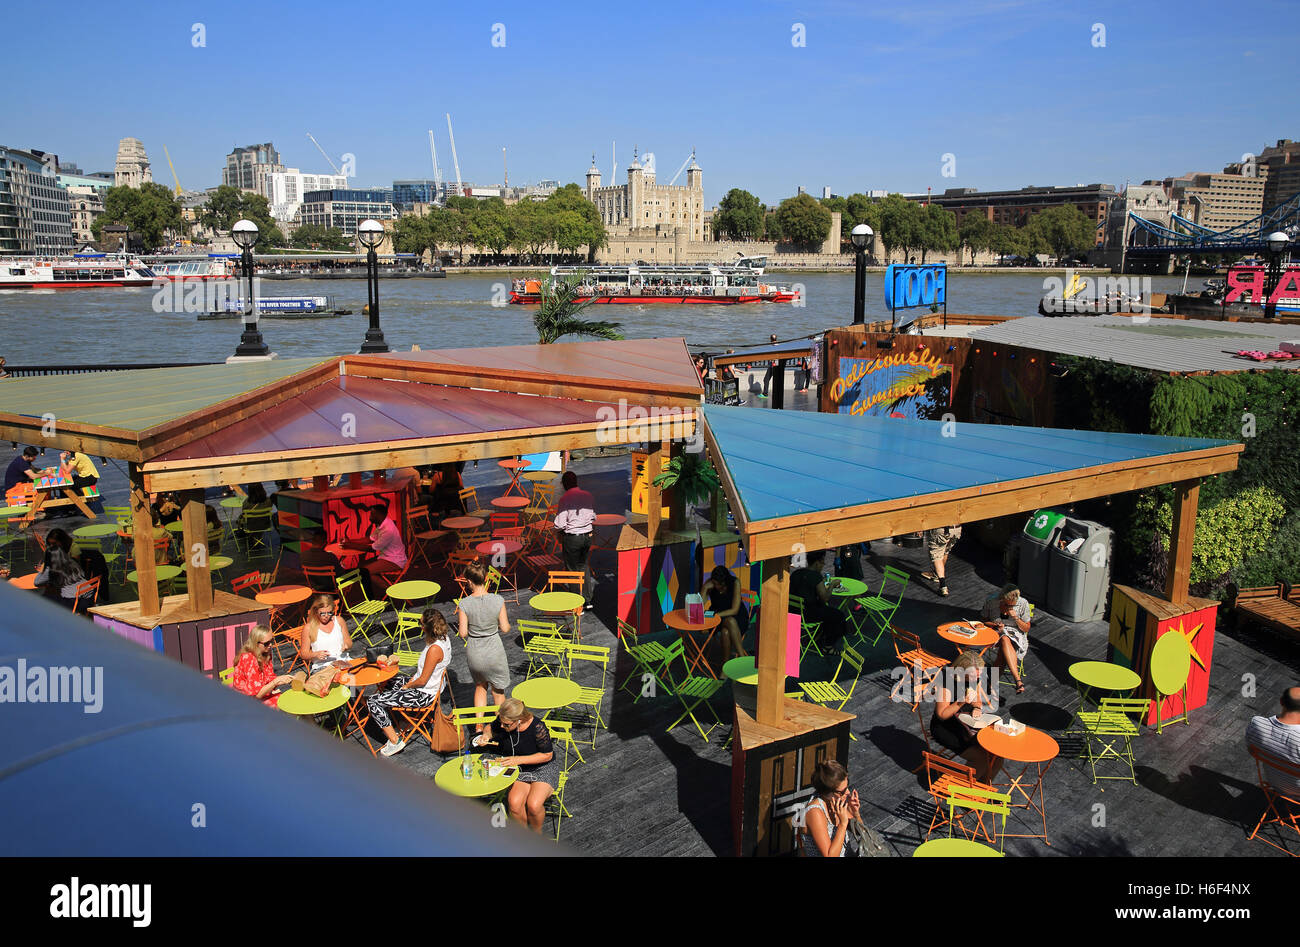 London Riviera, the summer pop up bar and kitchen, at More London Riverside, by the River Thames in Southwark, England, UK Stock Photo